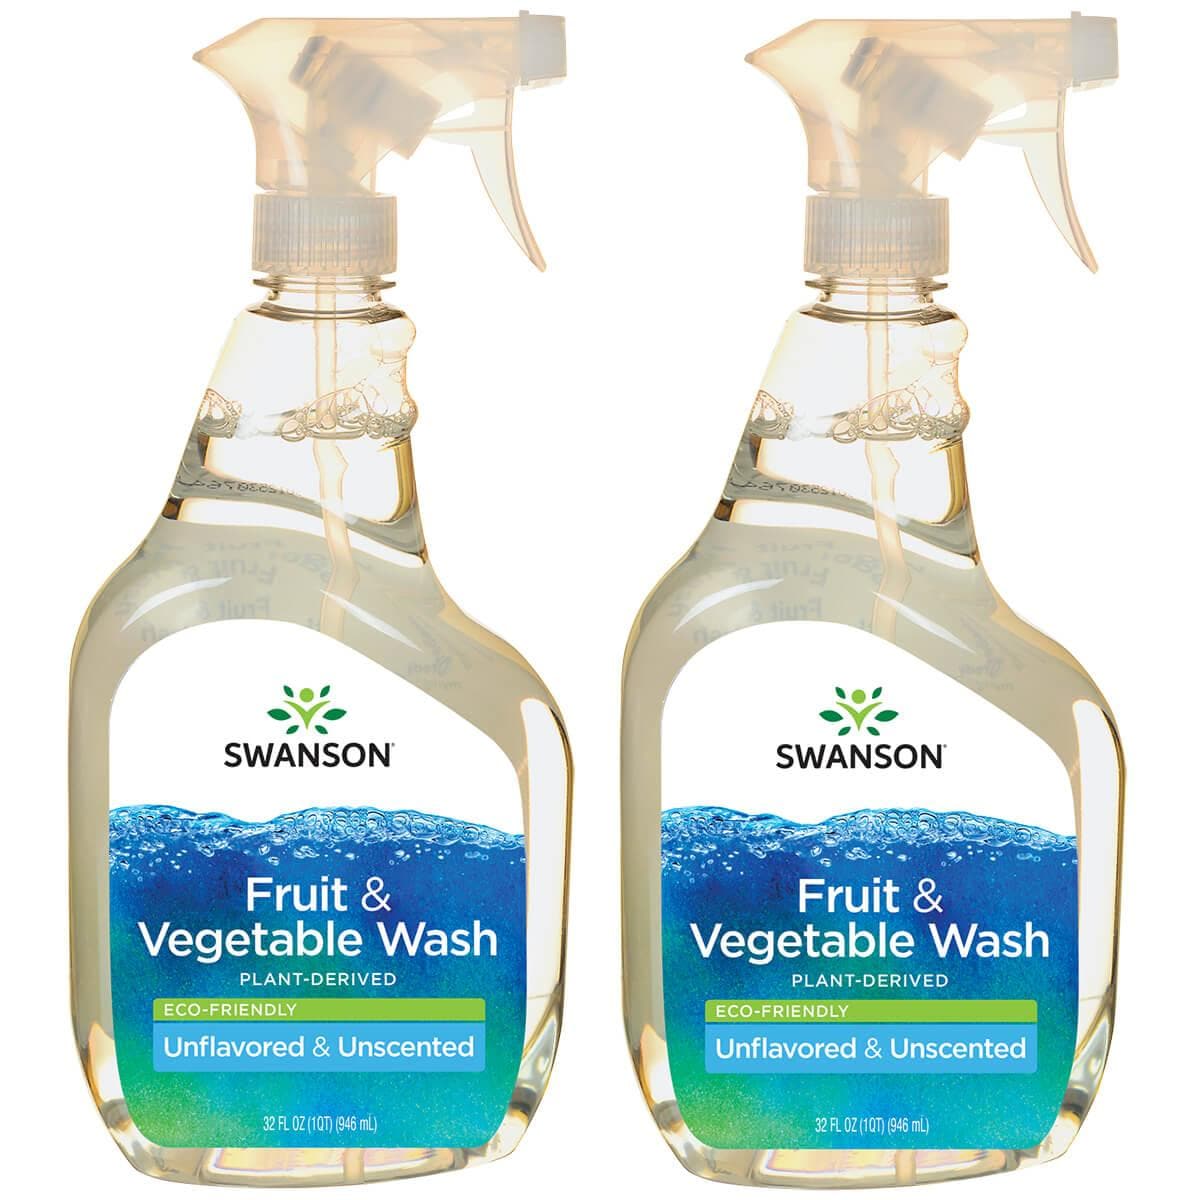 Swanson Healthy Home Fruit & Vegetable Wash - Eco-Friendly Unflavored Unscented 2 Pack 32 fl oz Liquid